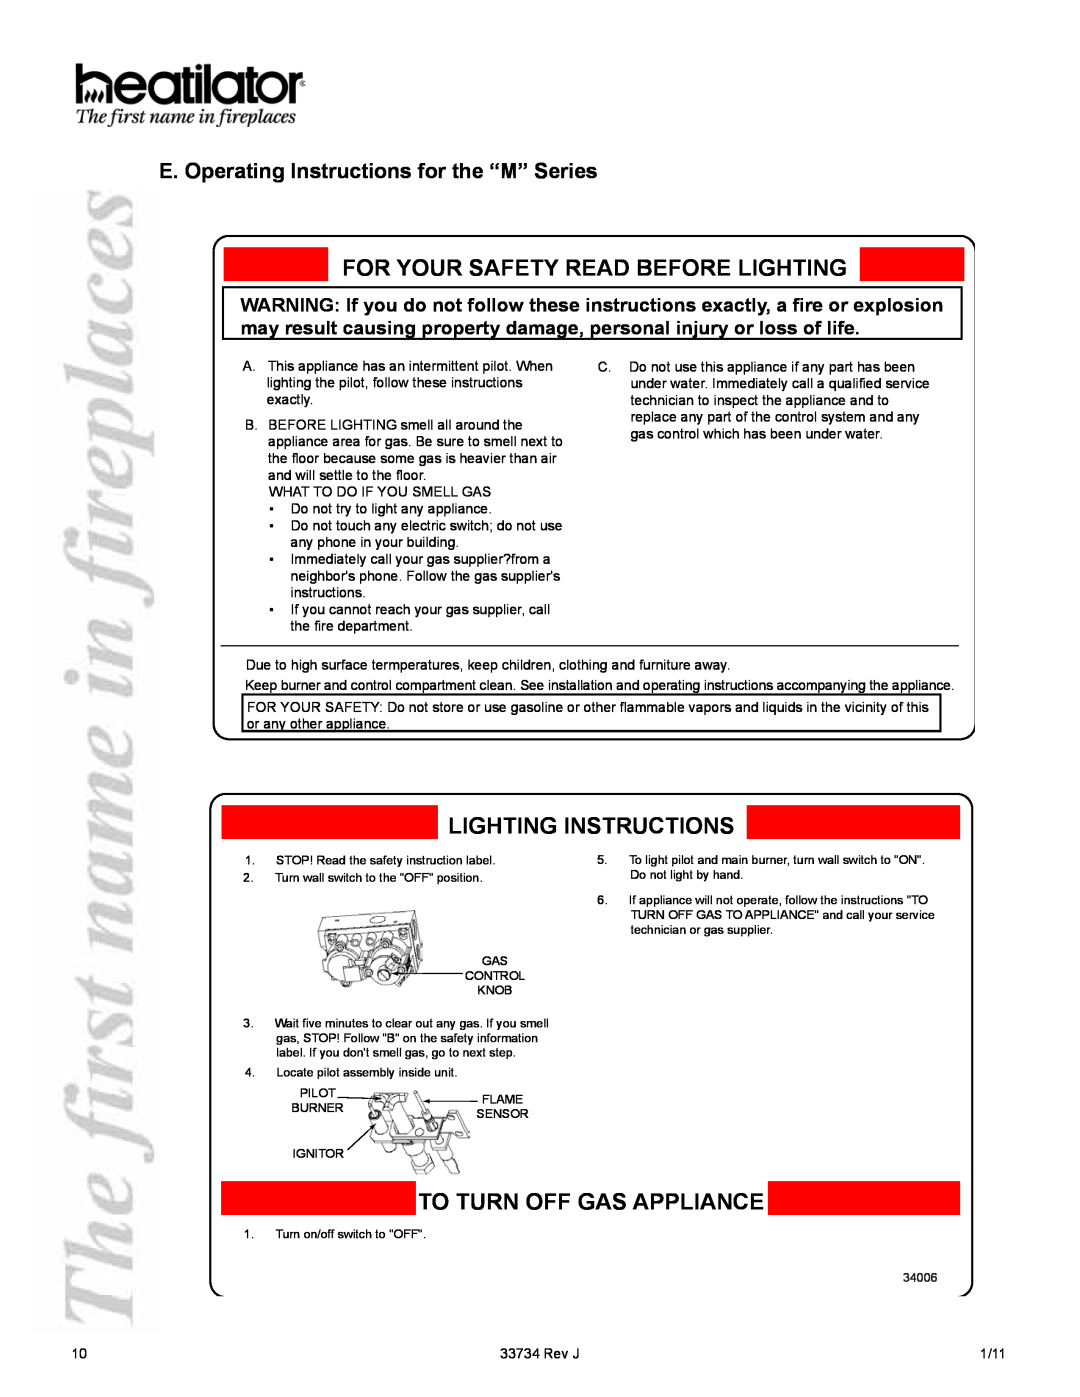 Hearth and Home Technologies FI42M E. Operating Instructions for the “M” Series, For Your Safety Read Before Lighting 